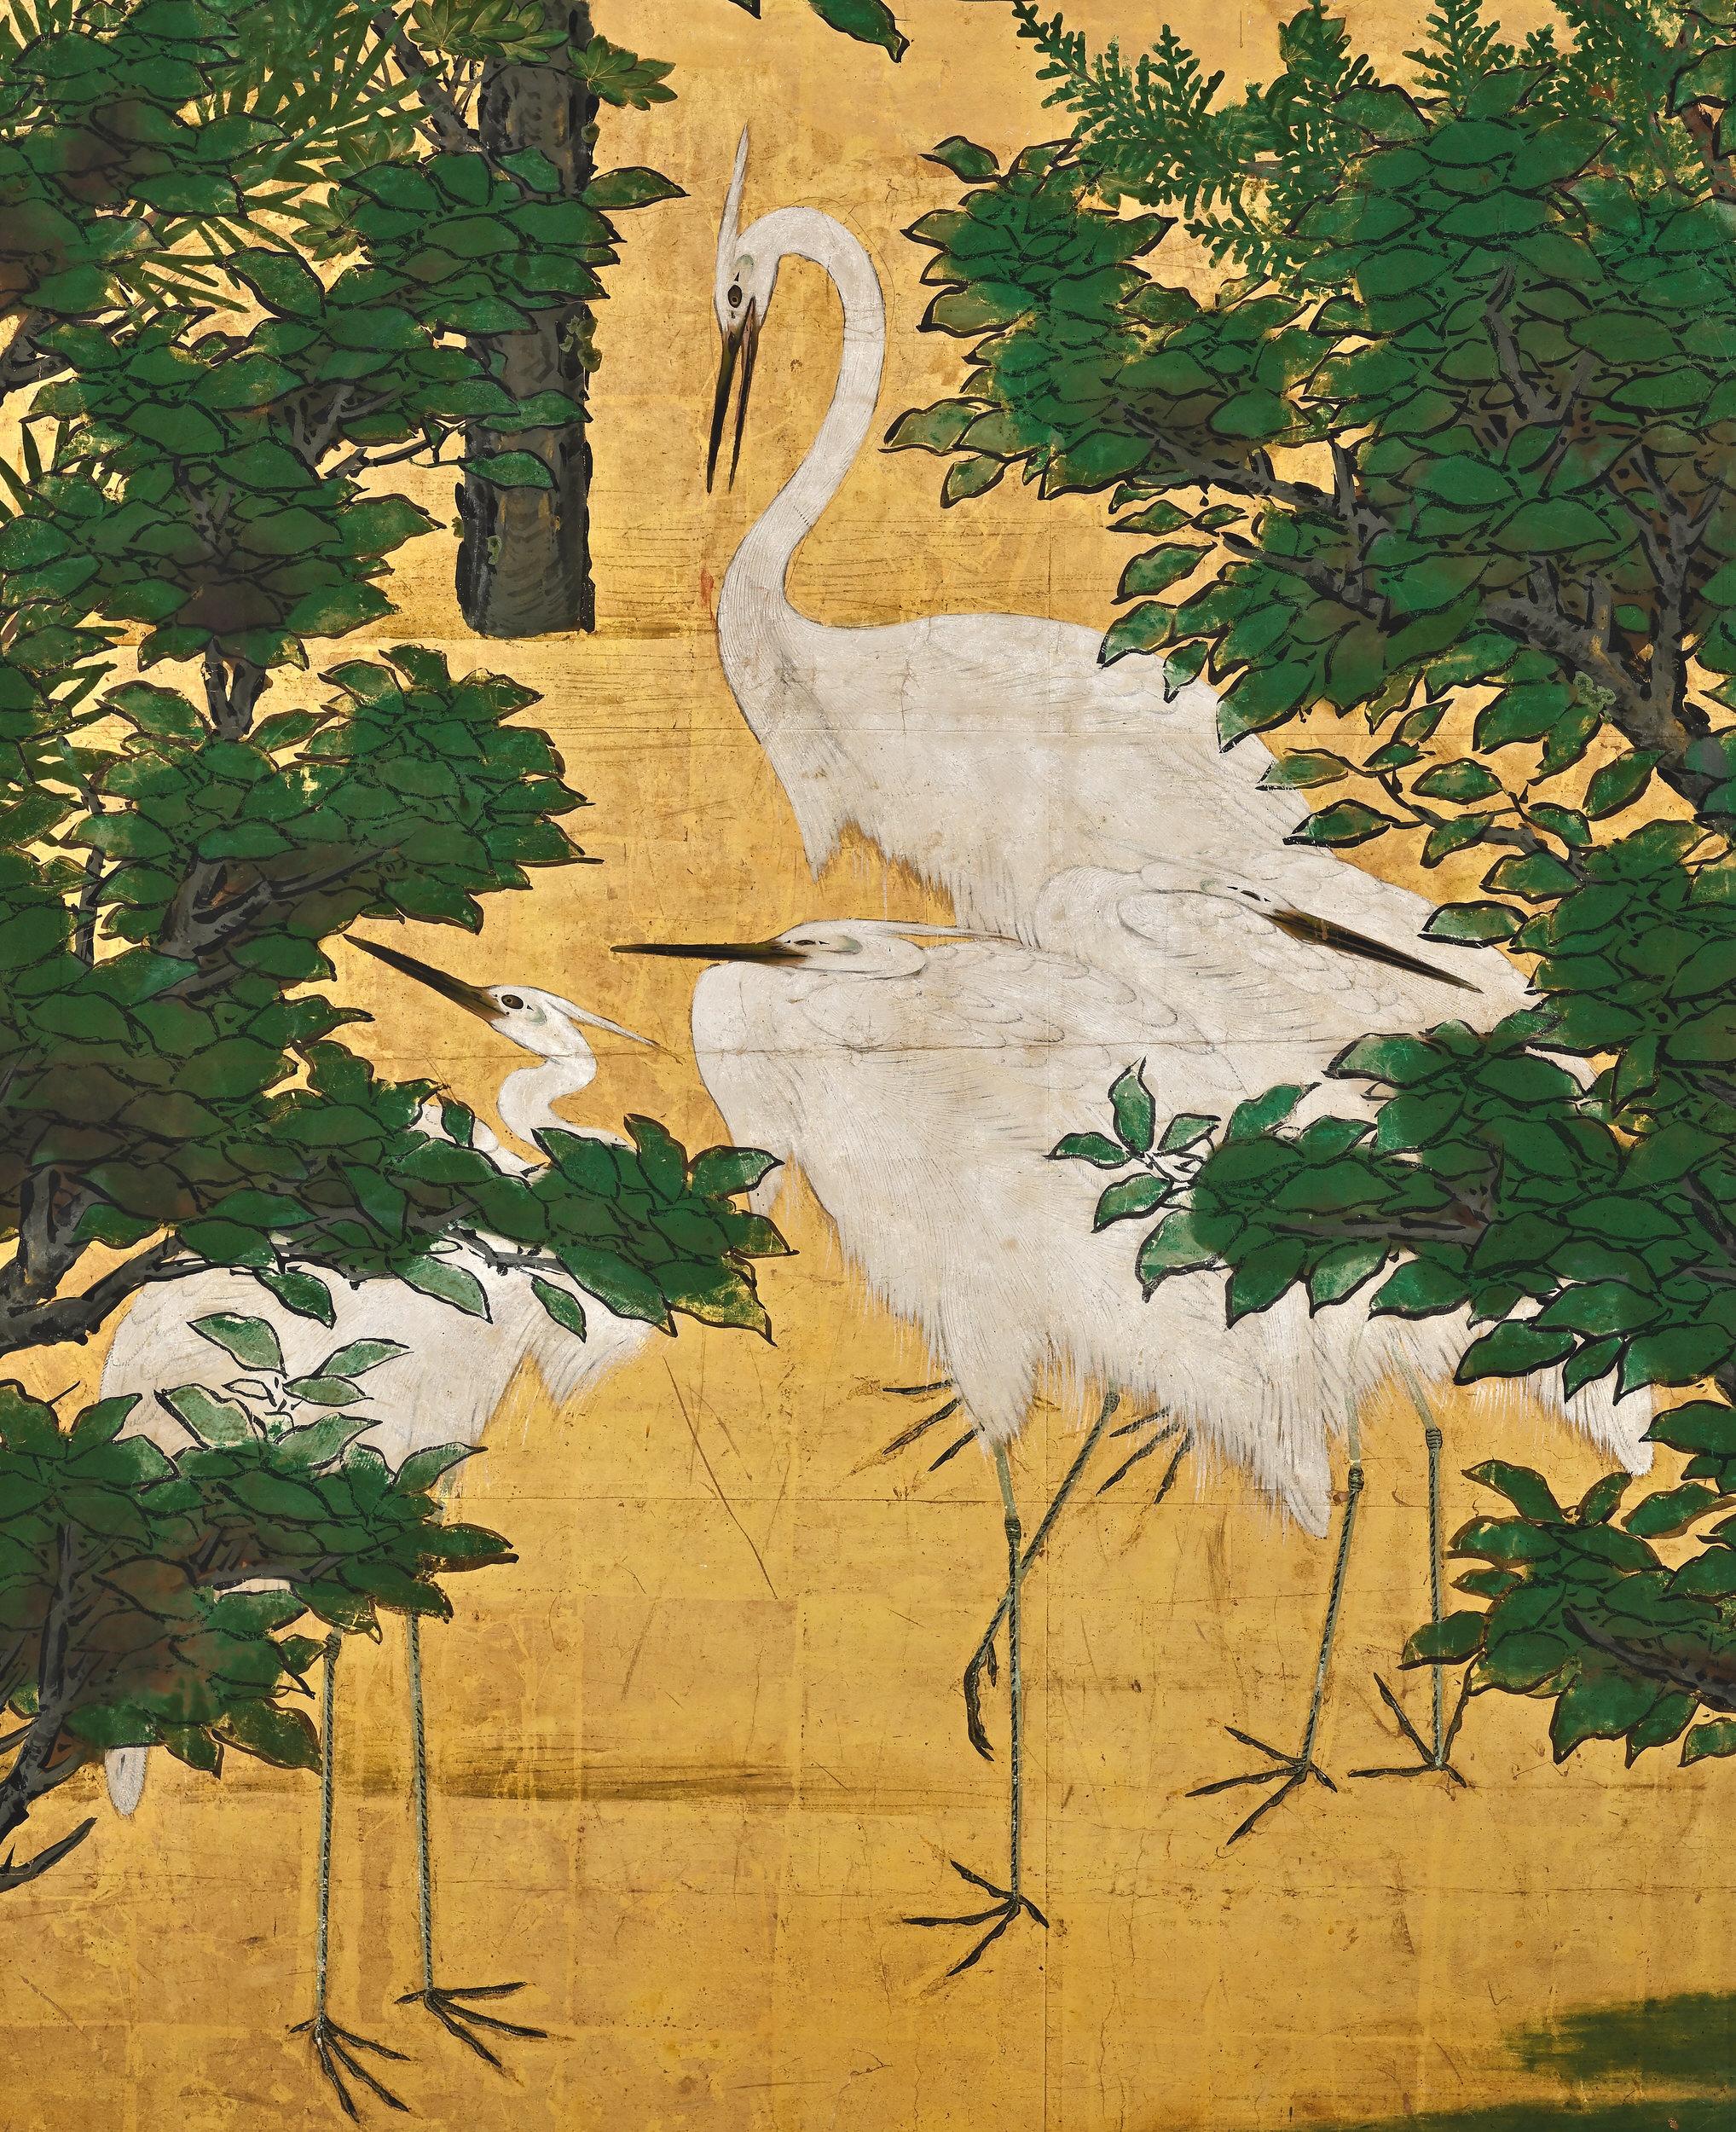 White Herons with Maples

Attributed to Kano Sanraku & Kano Sansetsu

Edo period, 1st half of the 17th century.

Two-fold screen. Ink, pigment, gofun and gold leaf on paper.

Elegant herons are most commonly portrayed in Japanese art